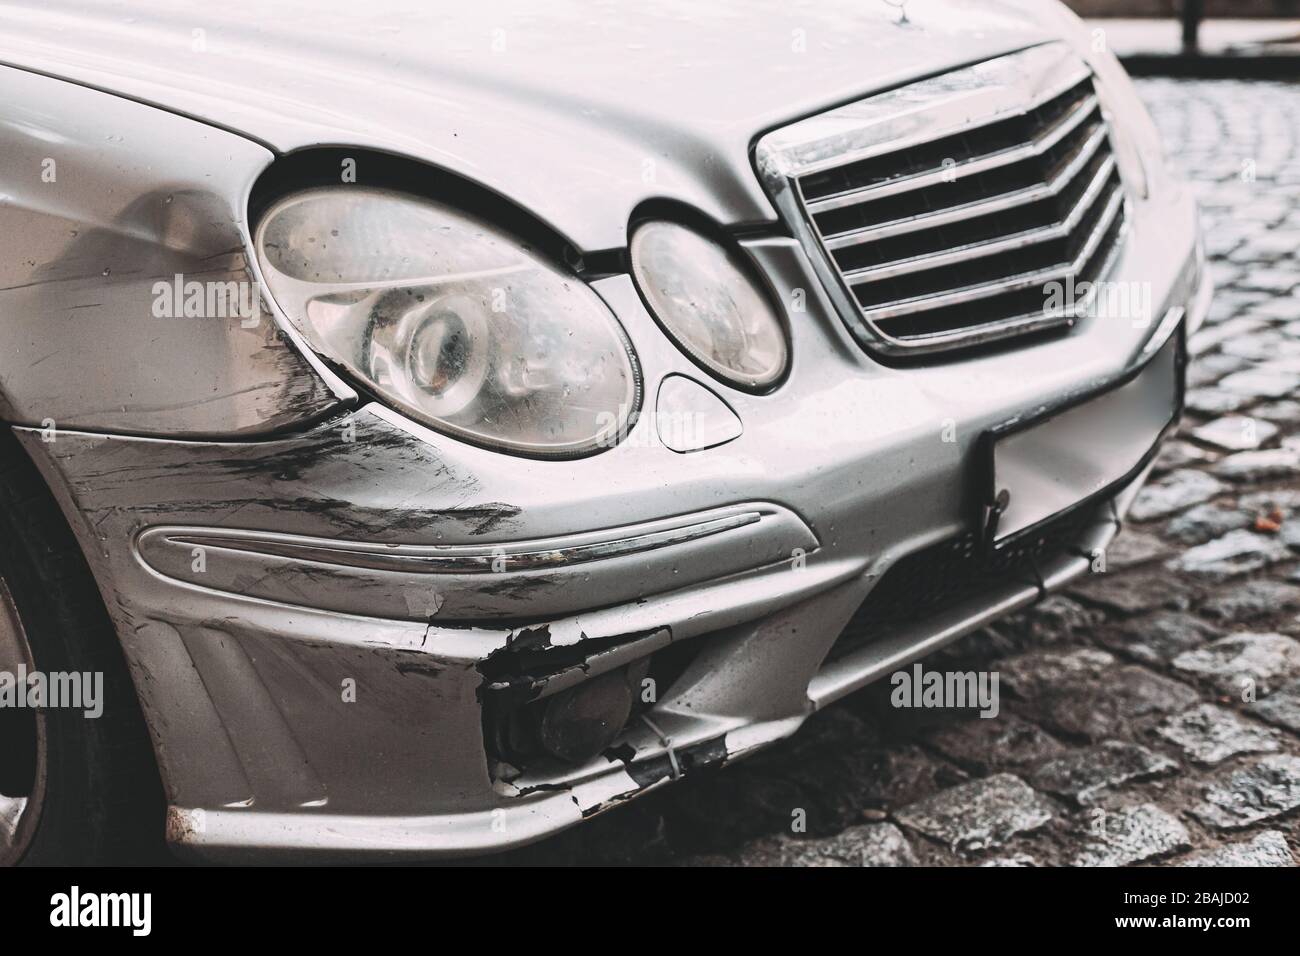 Broken Bumper Luxury Car Scratched With Deep Damage To Paint. Abandoned Car After Accident In City Street Stock Photo